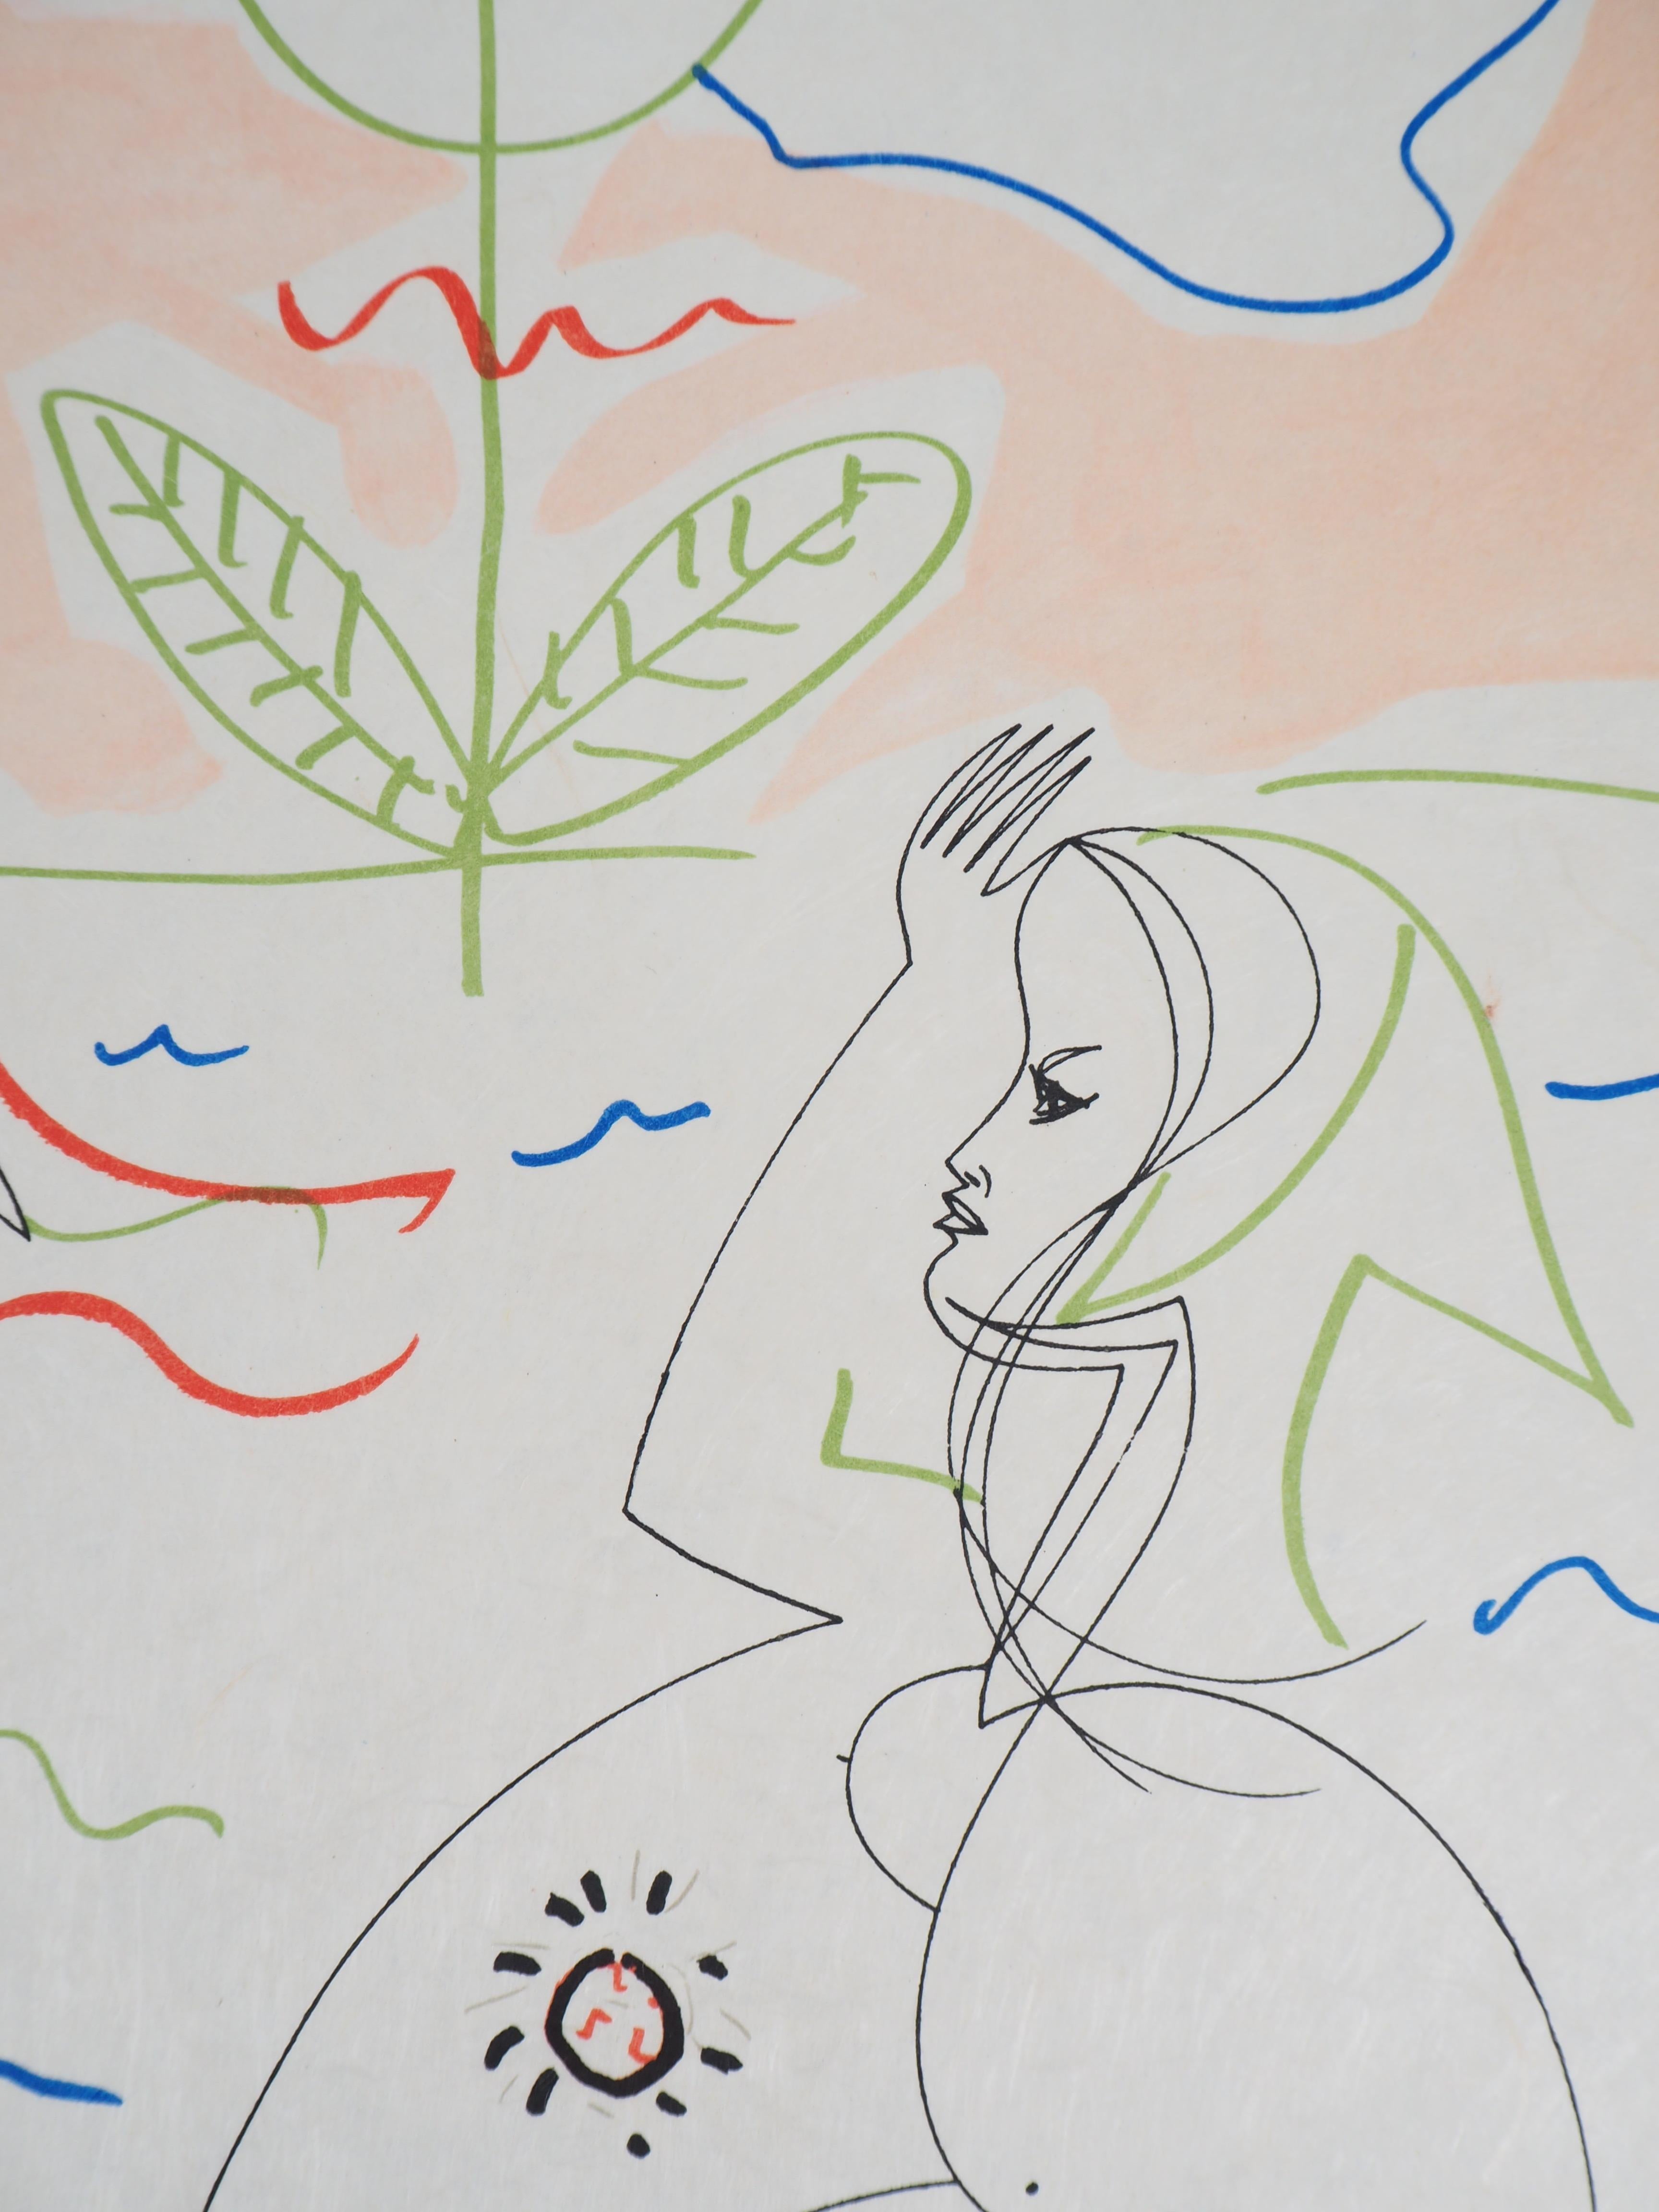 Jean Cocteau and Raymond Moretti
Birth of Venus

Original lithograph
Printed signature in the plate, handsigned by Raymond Moretti
Numbered 1/29 - Very look for proof bearing n°1
On japan paper 65 x 50 cm (c. 25.5 x 19.6 inch)

The edition was